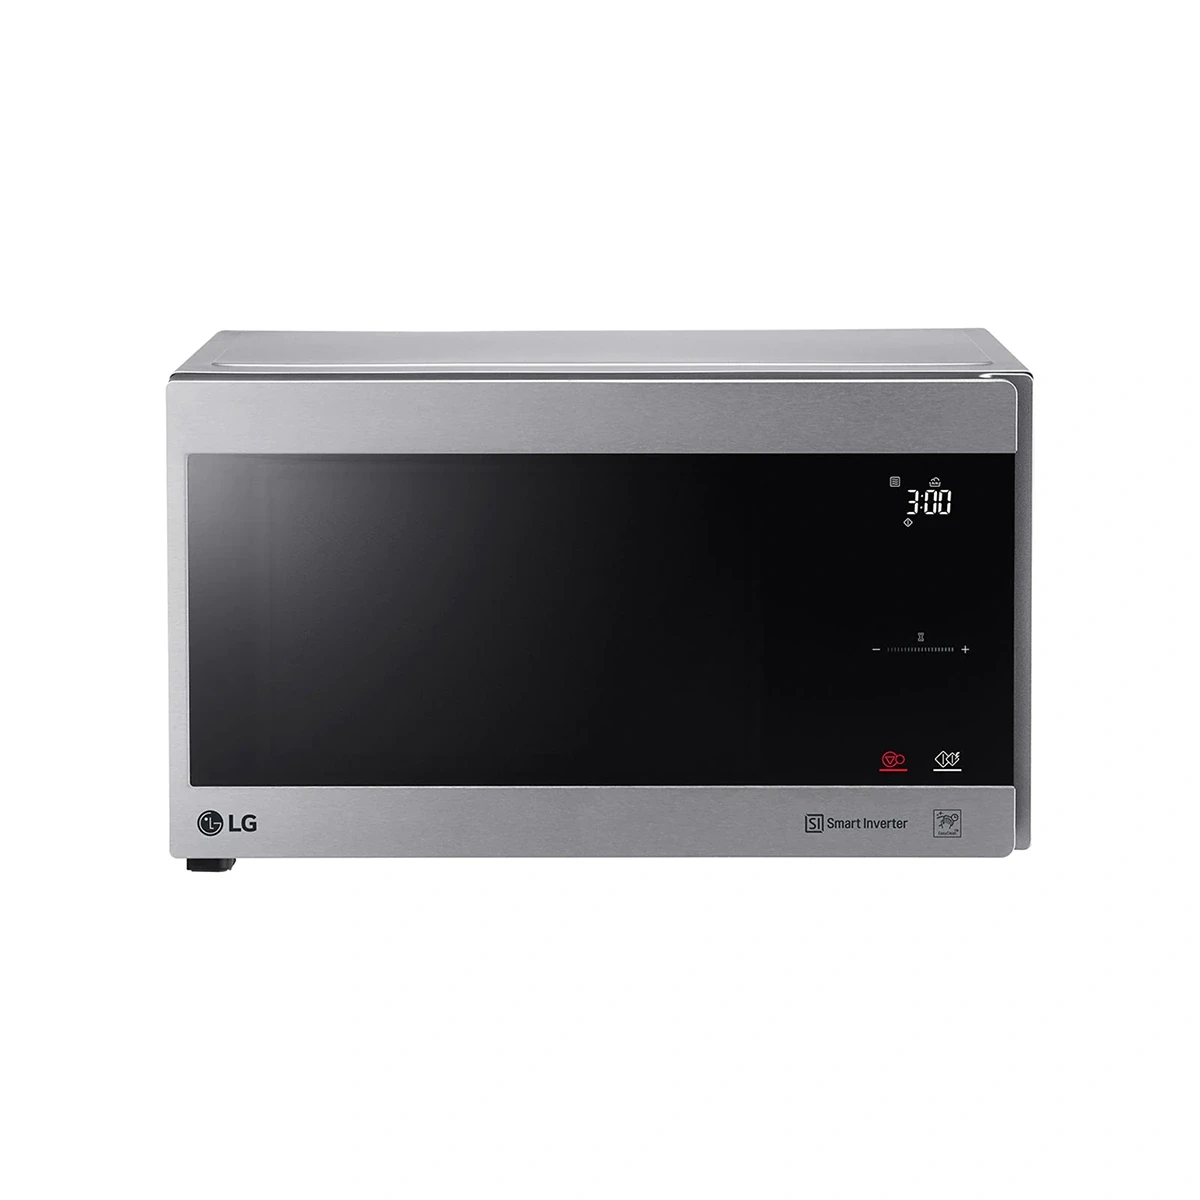 LG- Microwave (42 Liter SOLO, Cavity, Smart Inverter, Sensor cook, LED, Stable Ring, Glass touch & D